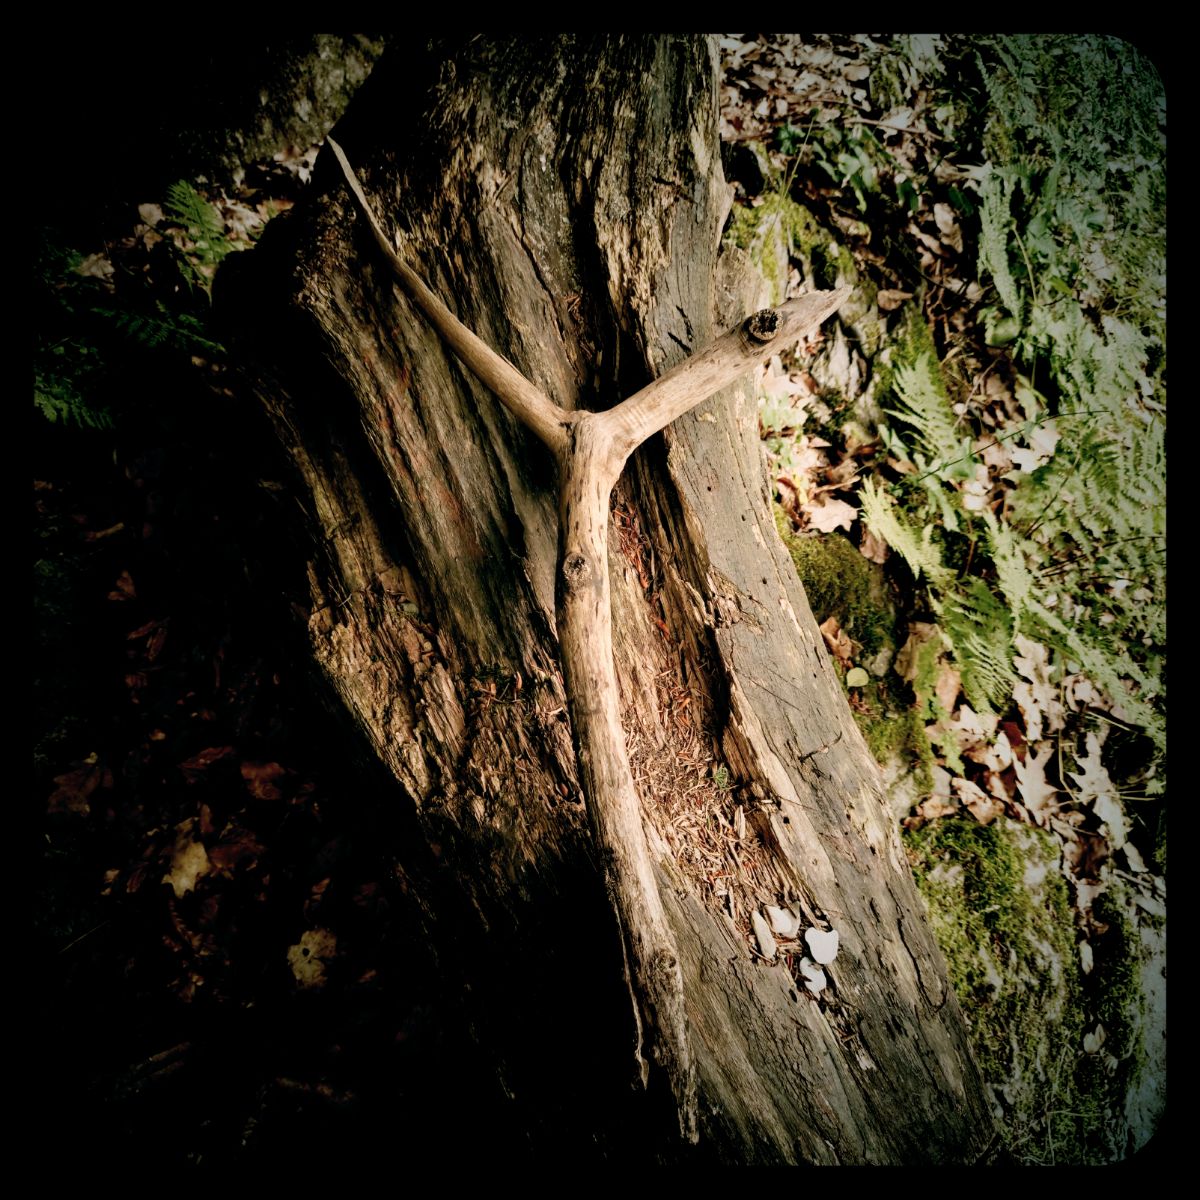 A y-shaped twig on an old mossy tree.